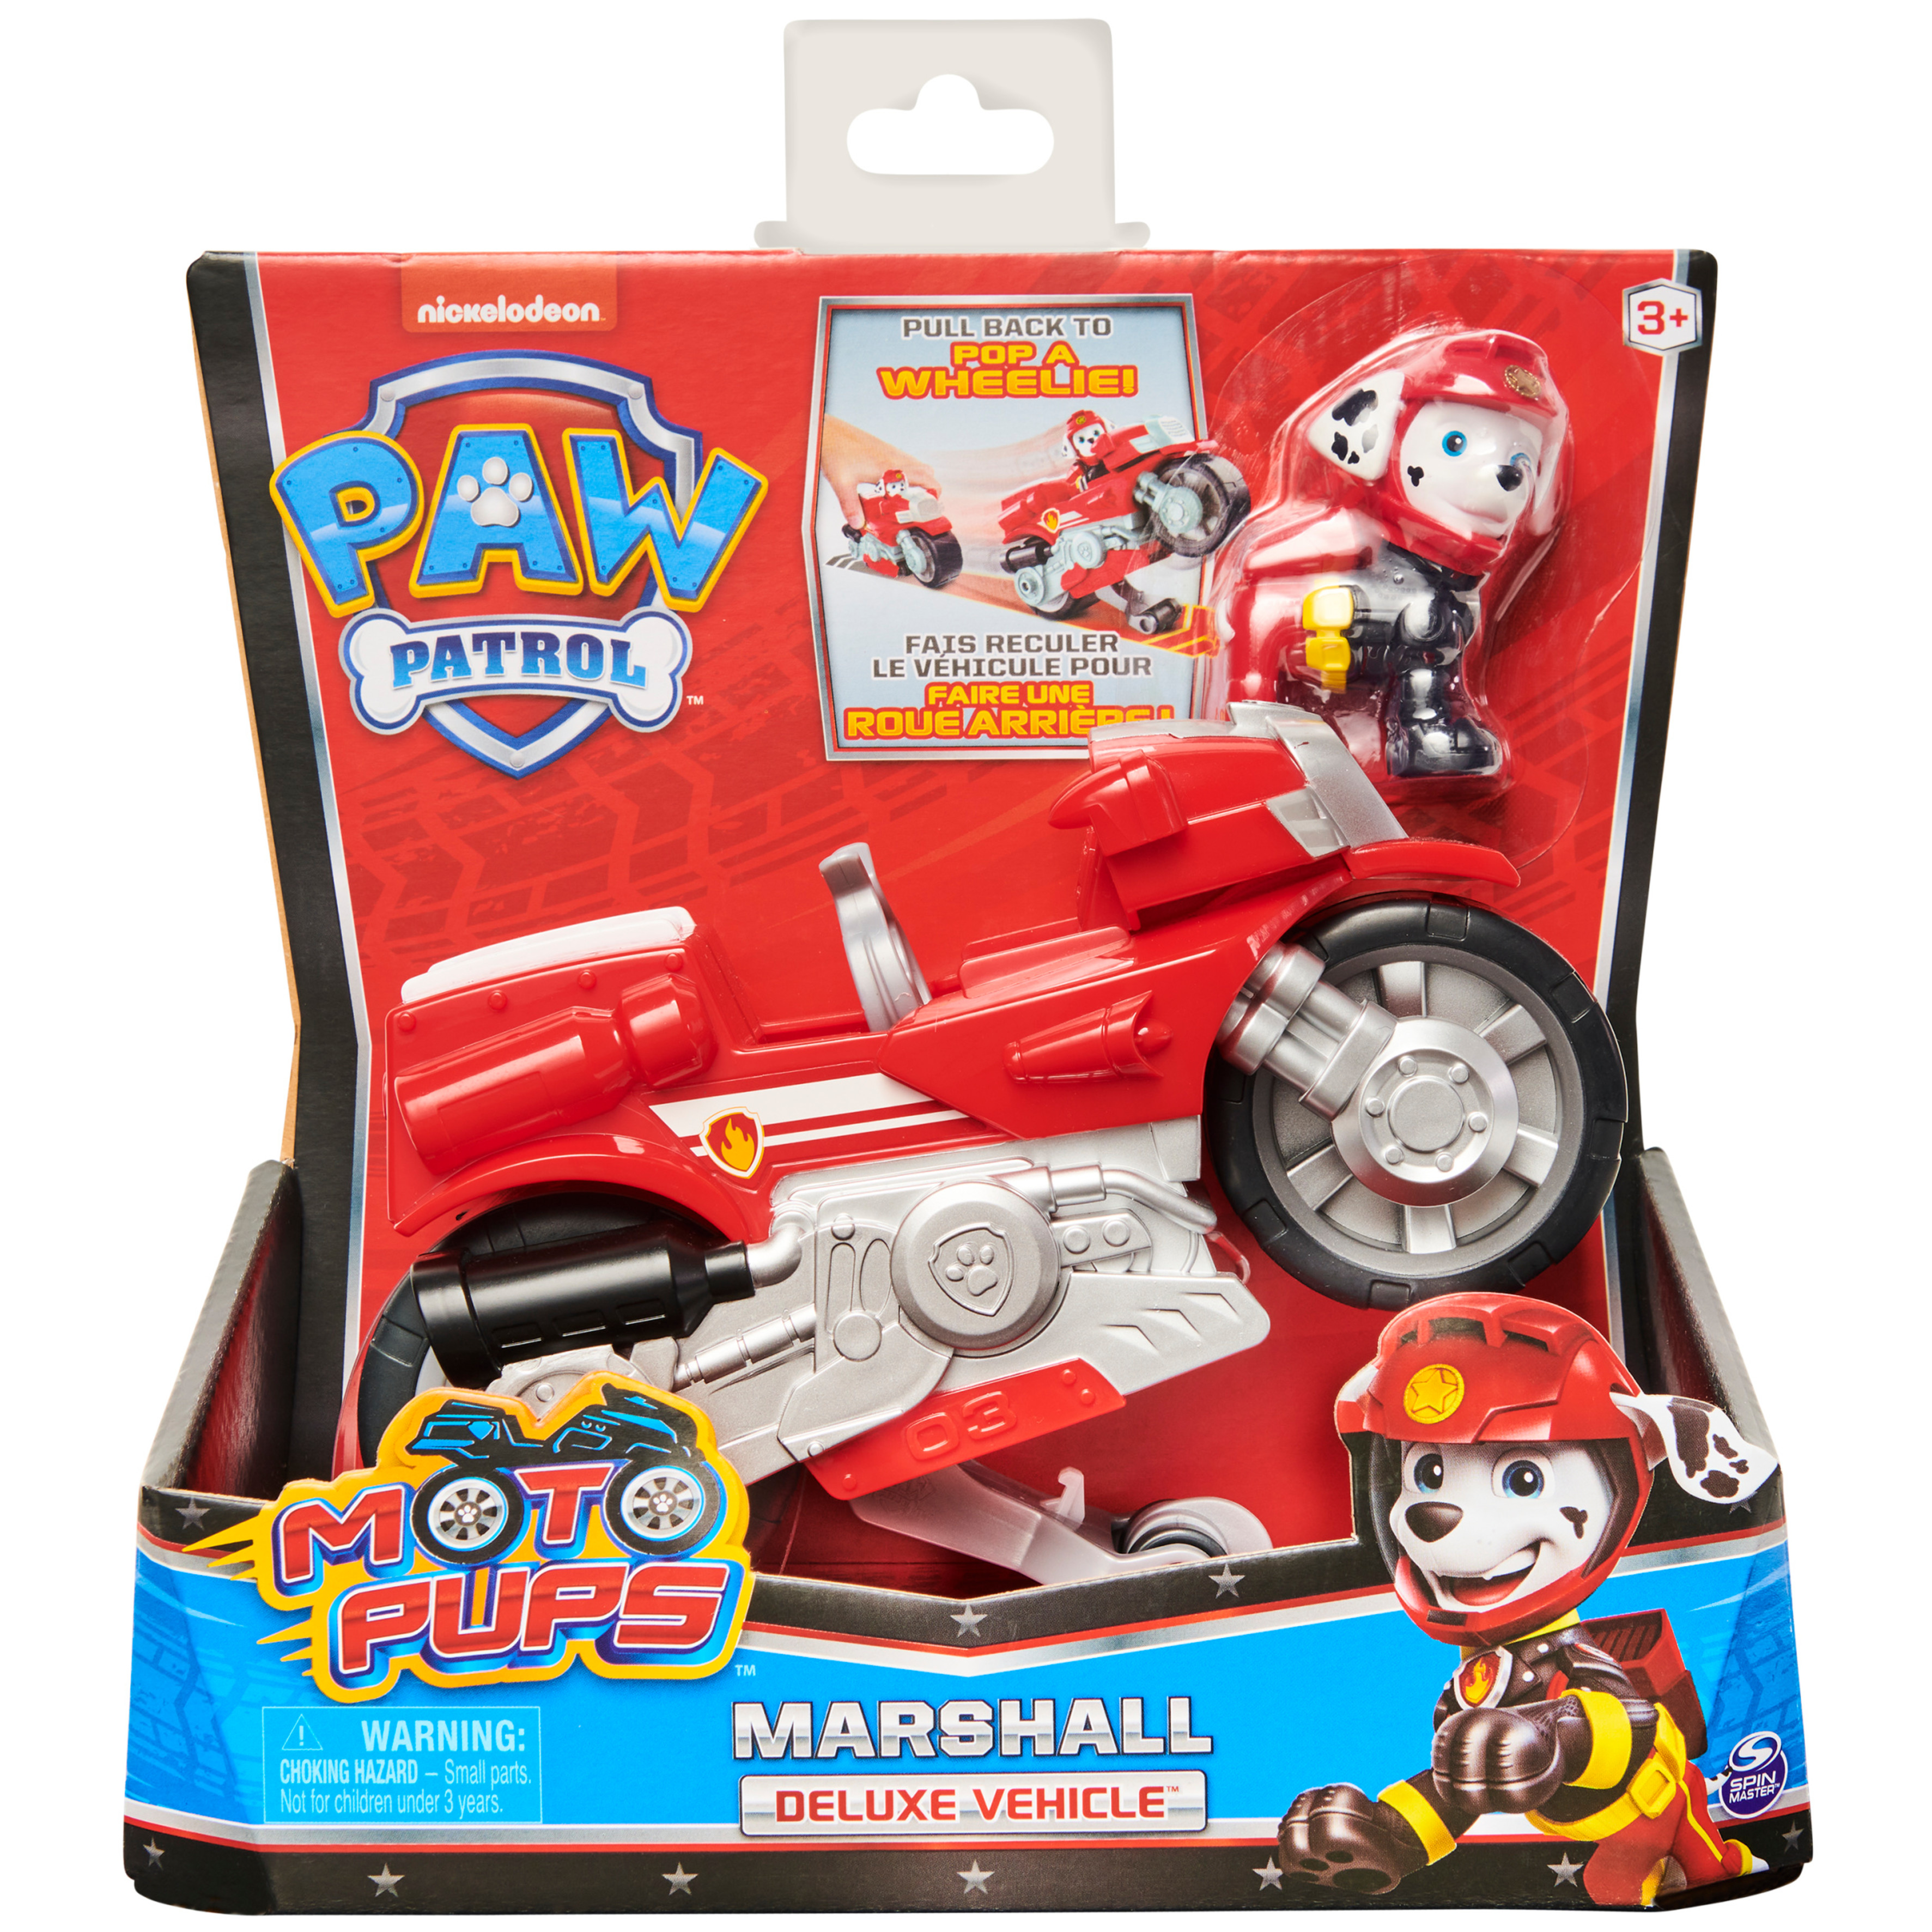 PAW Patrol, Moto Pups Marshall’s Deluxe Pull Back Motorcycle Vehicle with Wheelie Feature and Figure - image 2 of 7